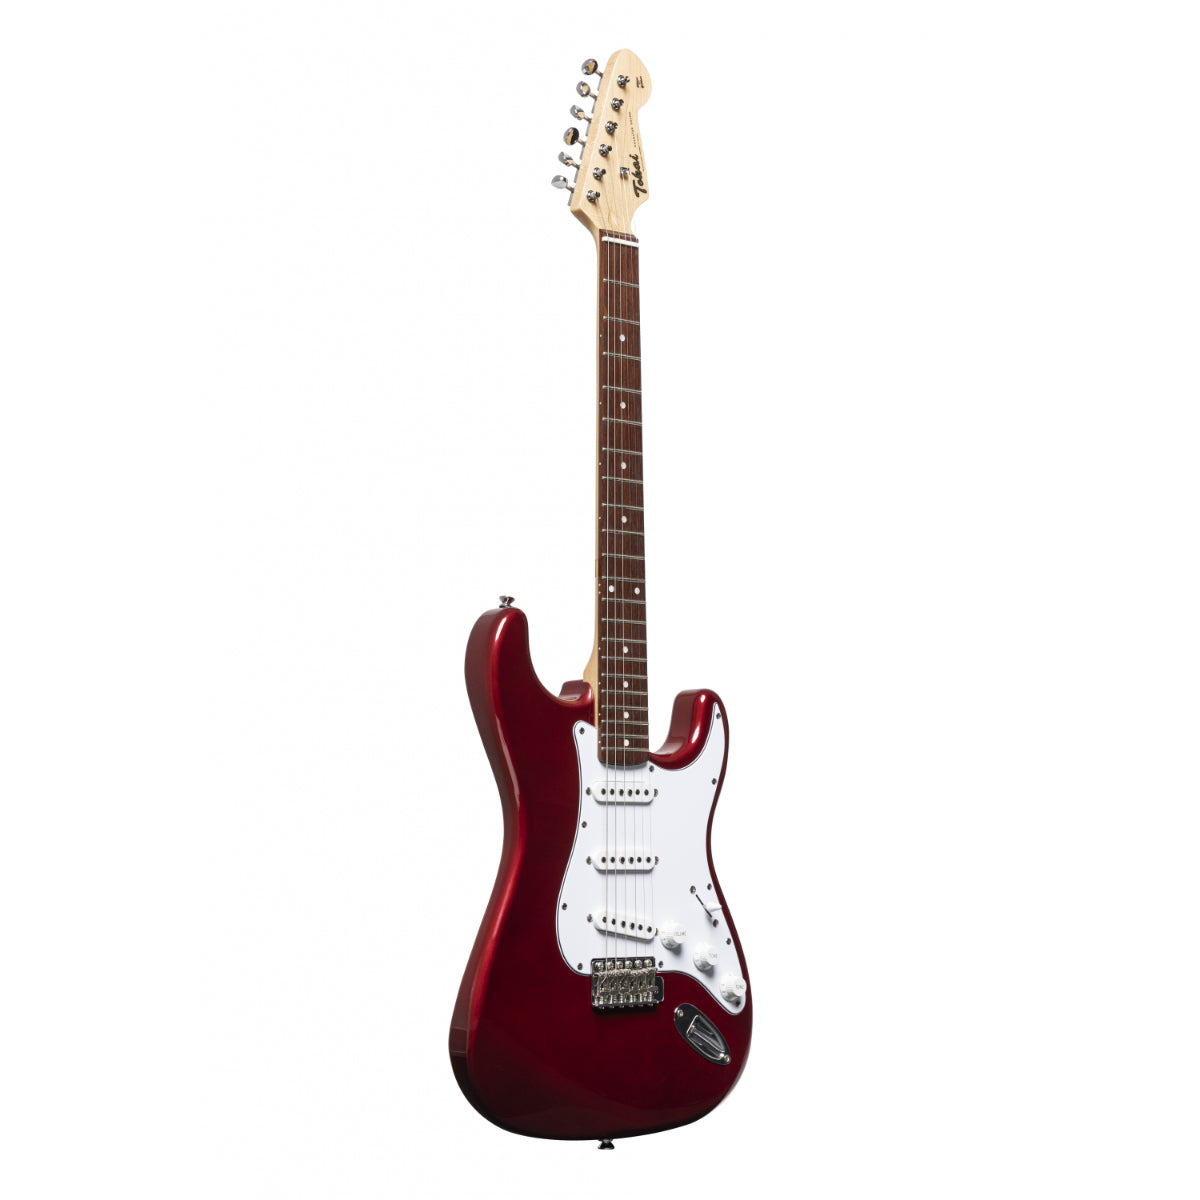 AST52 MR S-Style Electric, Candy Apple Red